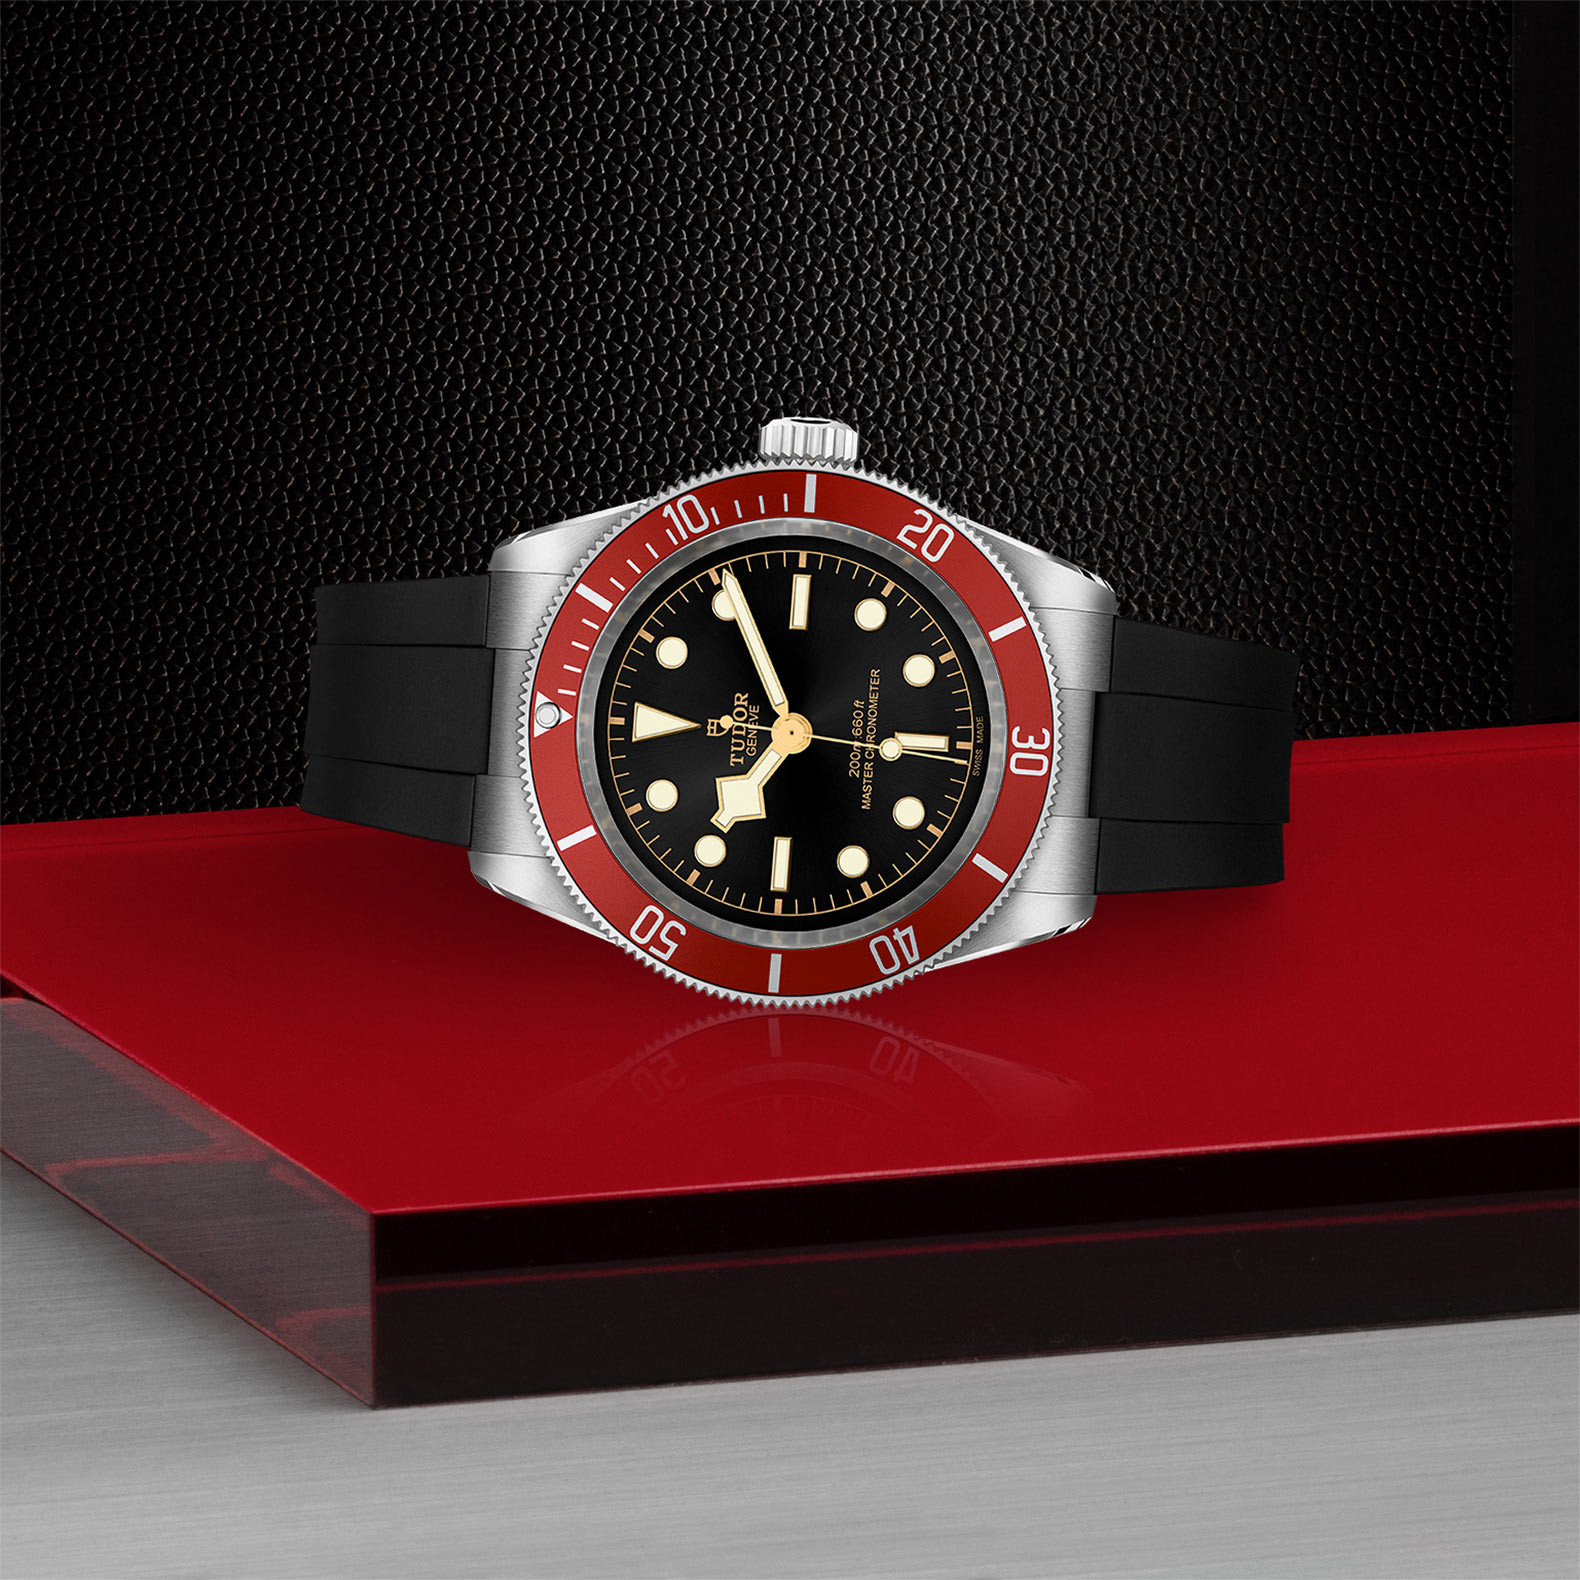 TUDOR Black Bay with 41mm Steel Case and Black Rubber Strap M7941A1A0RU-0002 Watch in Store Laying Down